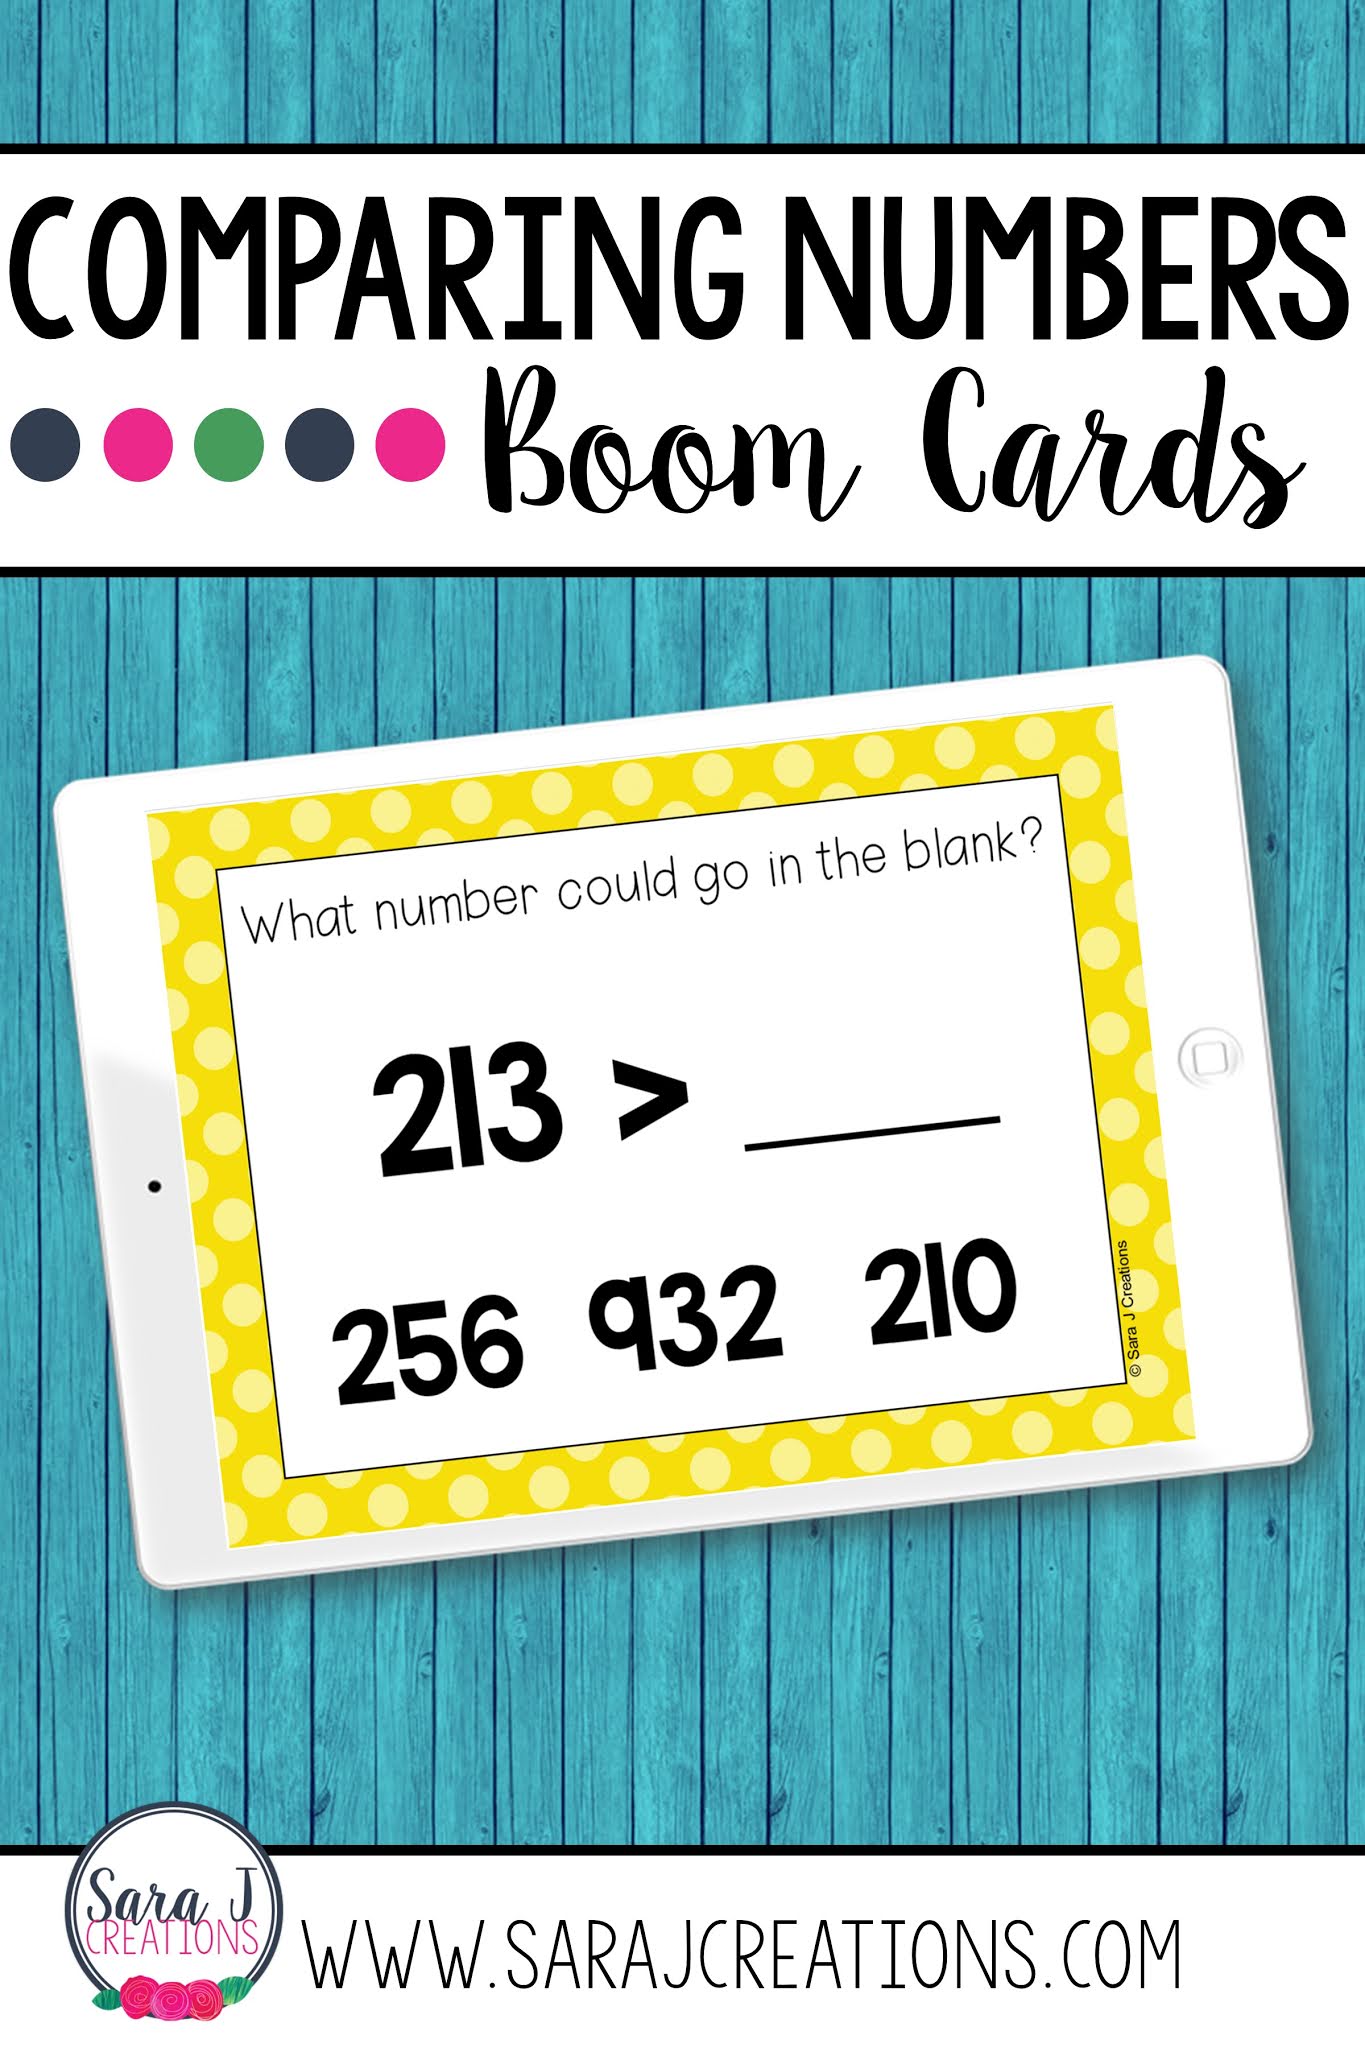 Make digital learning fun with these engaging, no prep Comparing Numbers Boom Cards. These digital task cards are perfect for remote learning but can also be used in a traditional classroom on devices such as ipads, tables, Chromebooks, smartboards, and more. Designed for 2nd grade, these place value task cards include numbers up to 1,000.